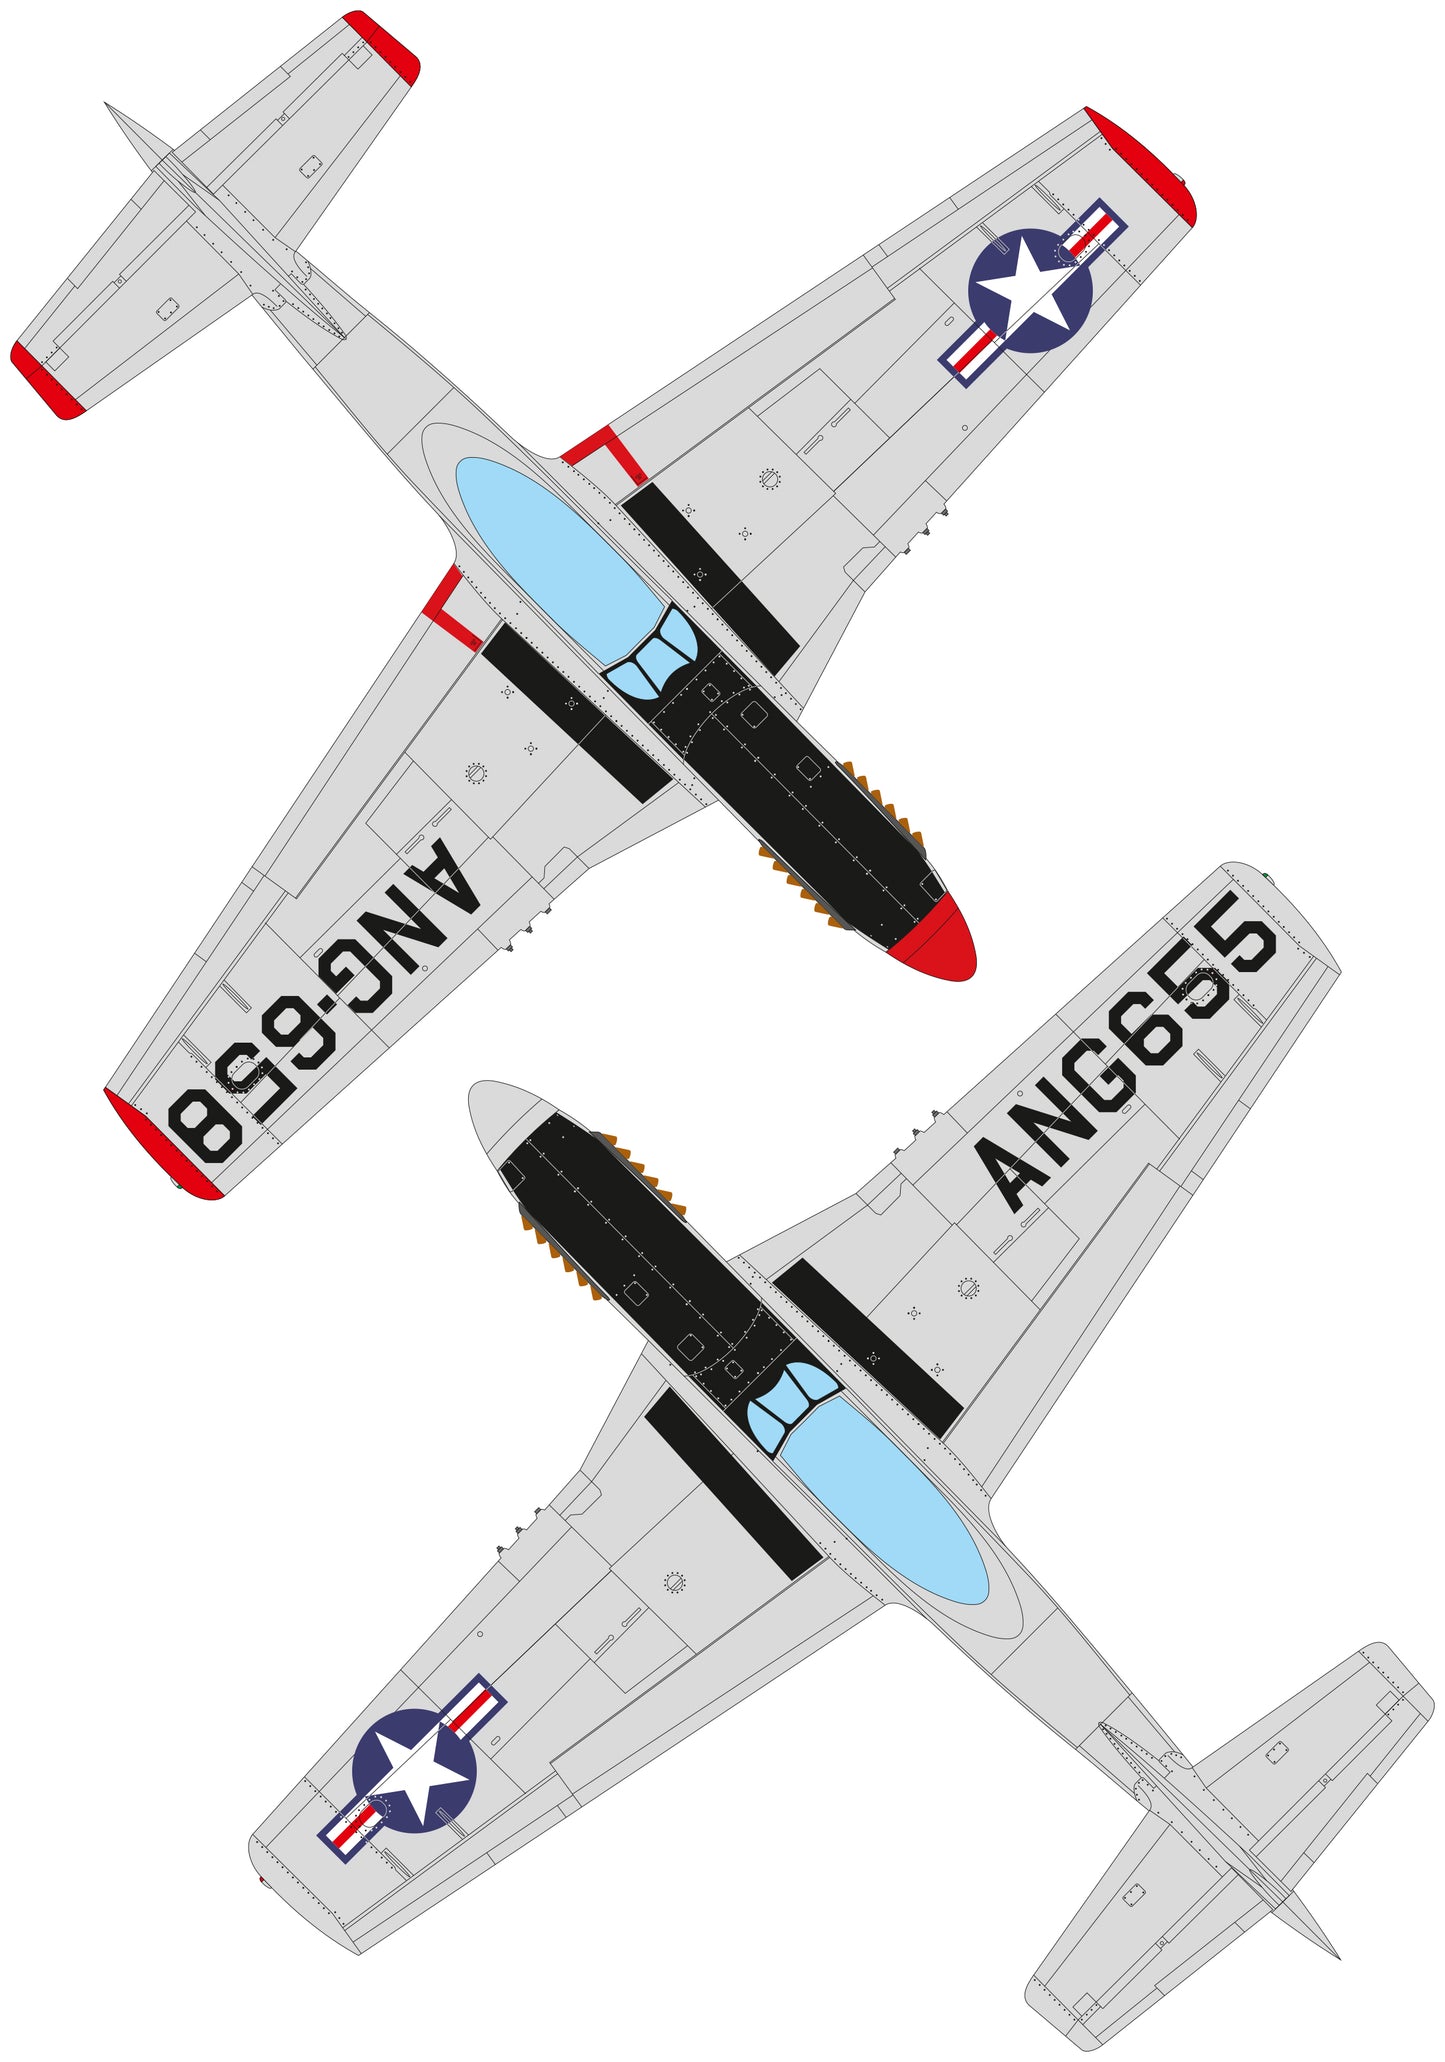 TF-51D-25NA (TEMCO) Air National Guard conversion set for Eduard kit P-51D 1/48 scale